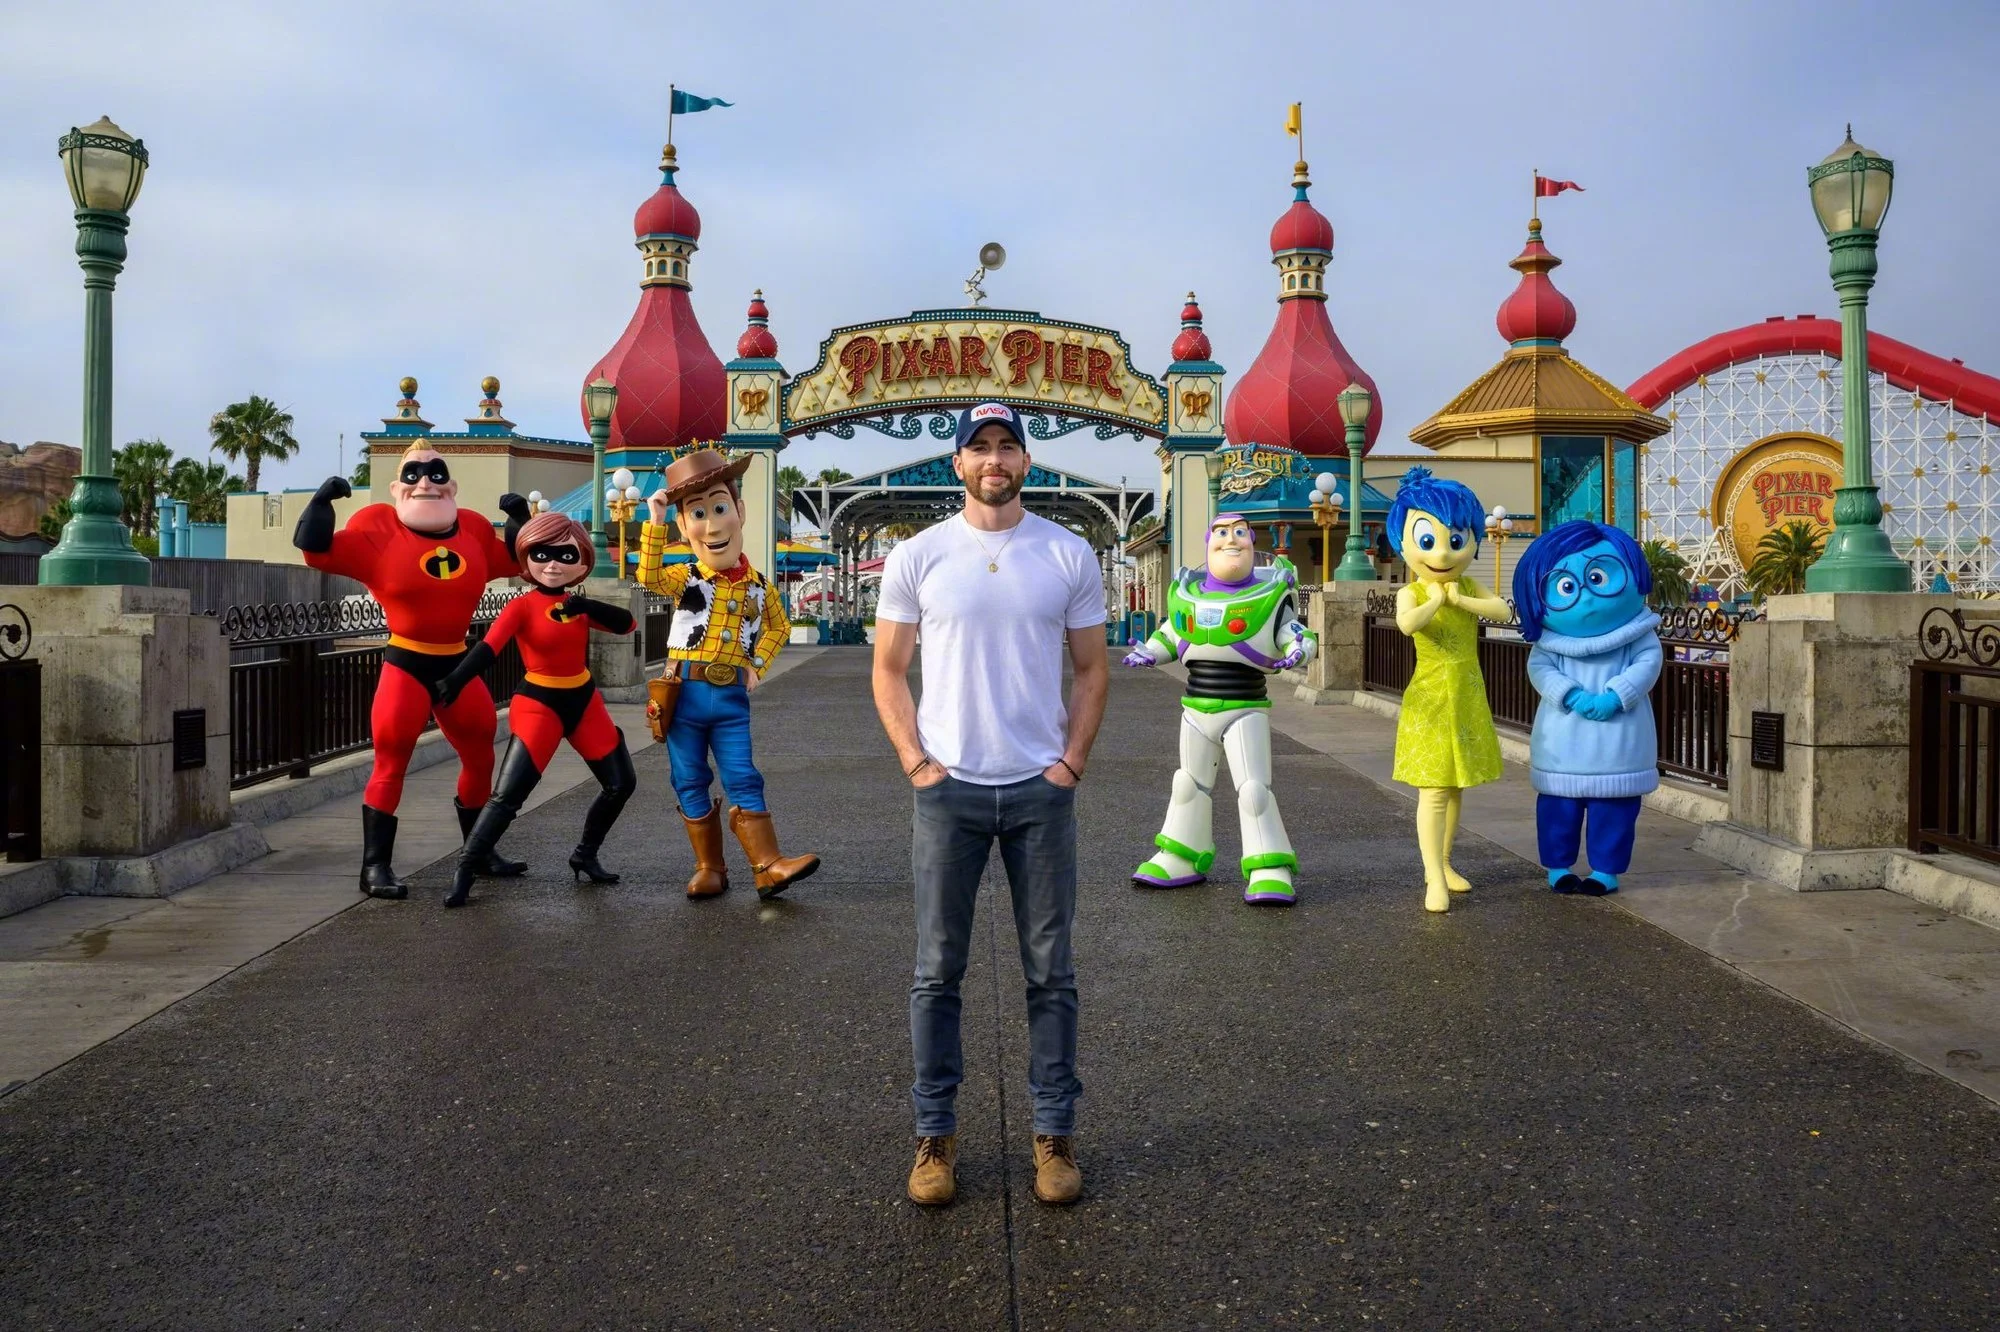 Chris Evans appeared at Disneyland to promote the new film "Lightyear"